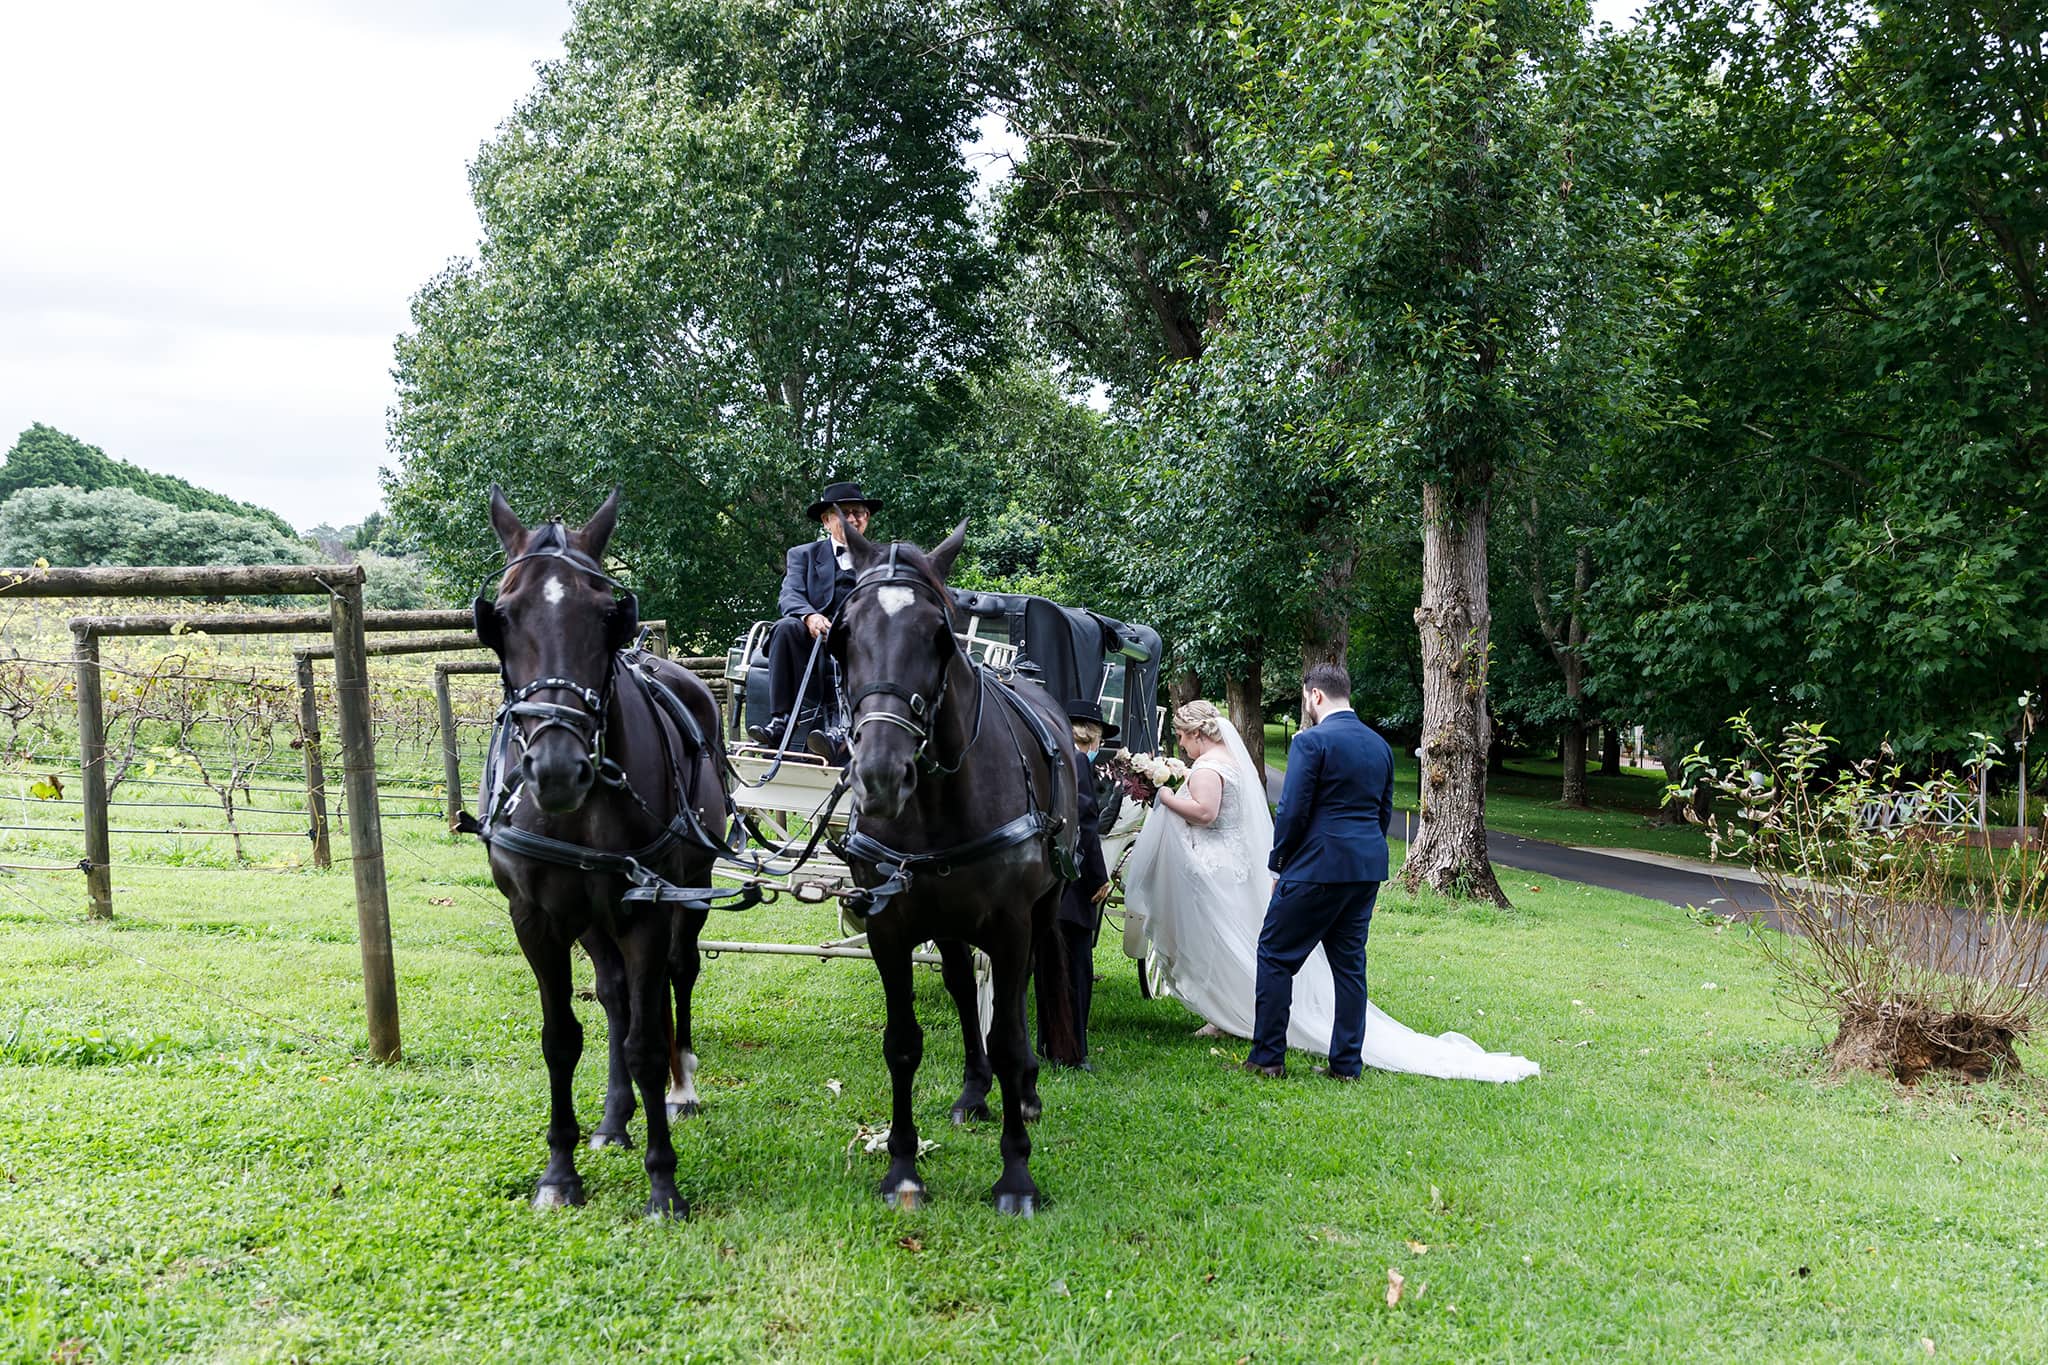 Tamborine Mountain wedding transport arriving by horse and carriage